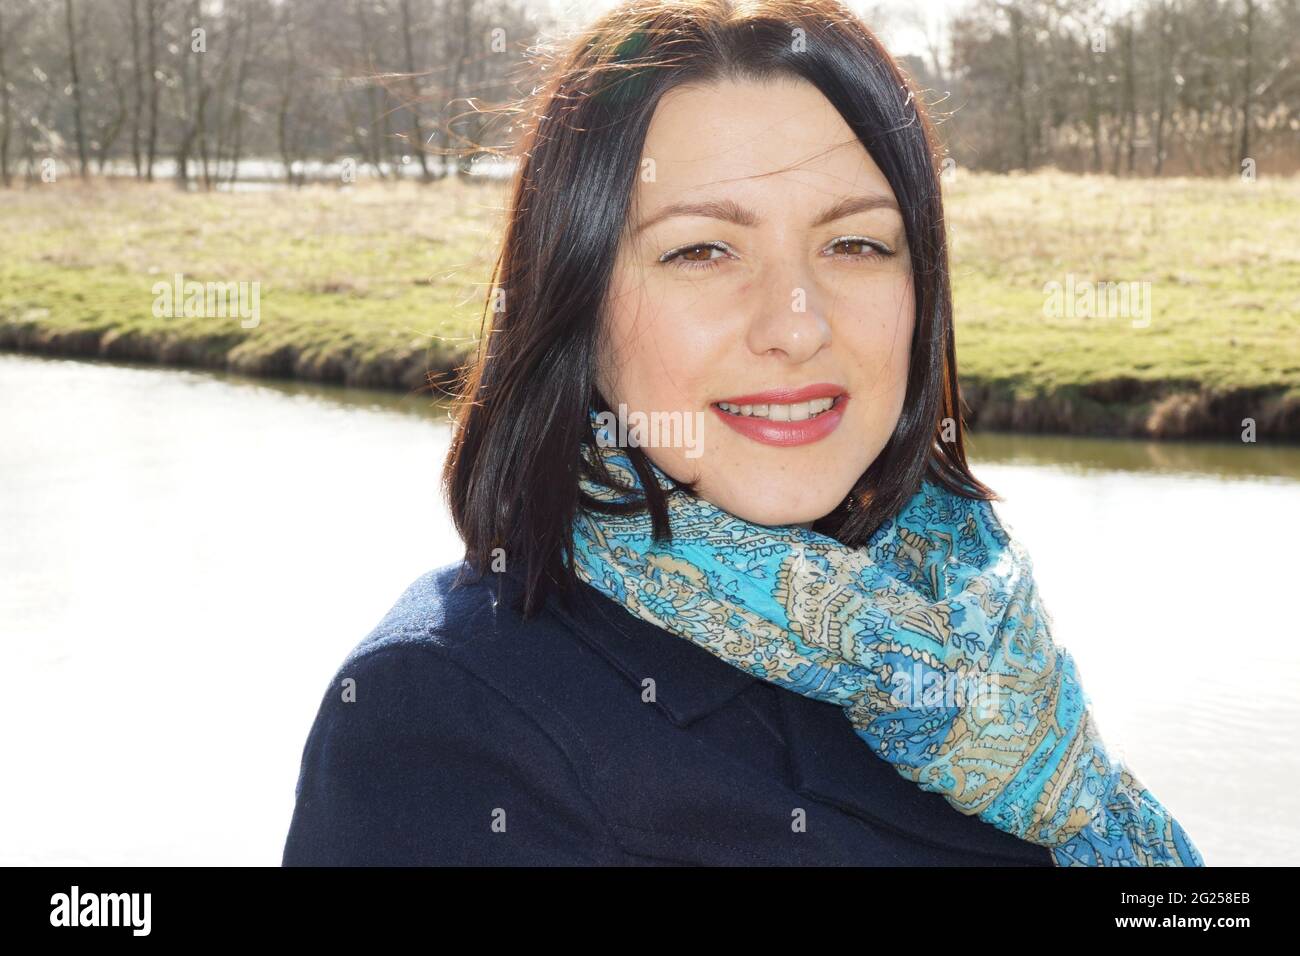 Smiling  Netherlandian brunette with a blue scarf posing with a river and field on background Stock Photo